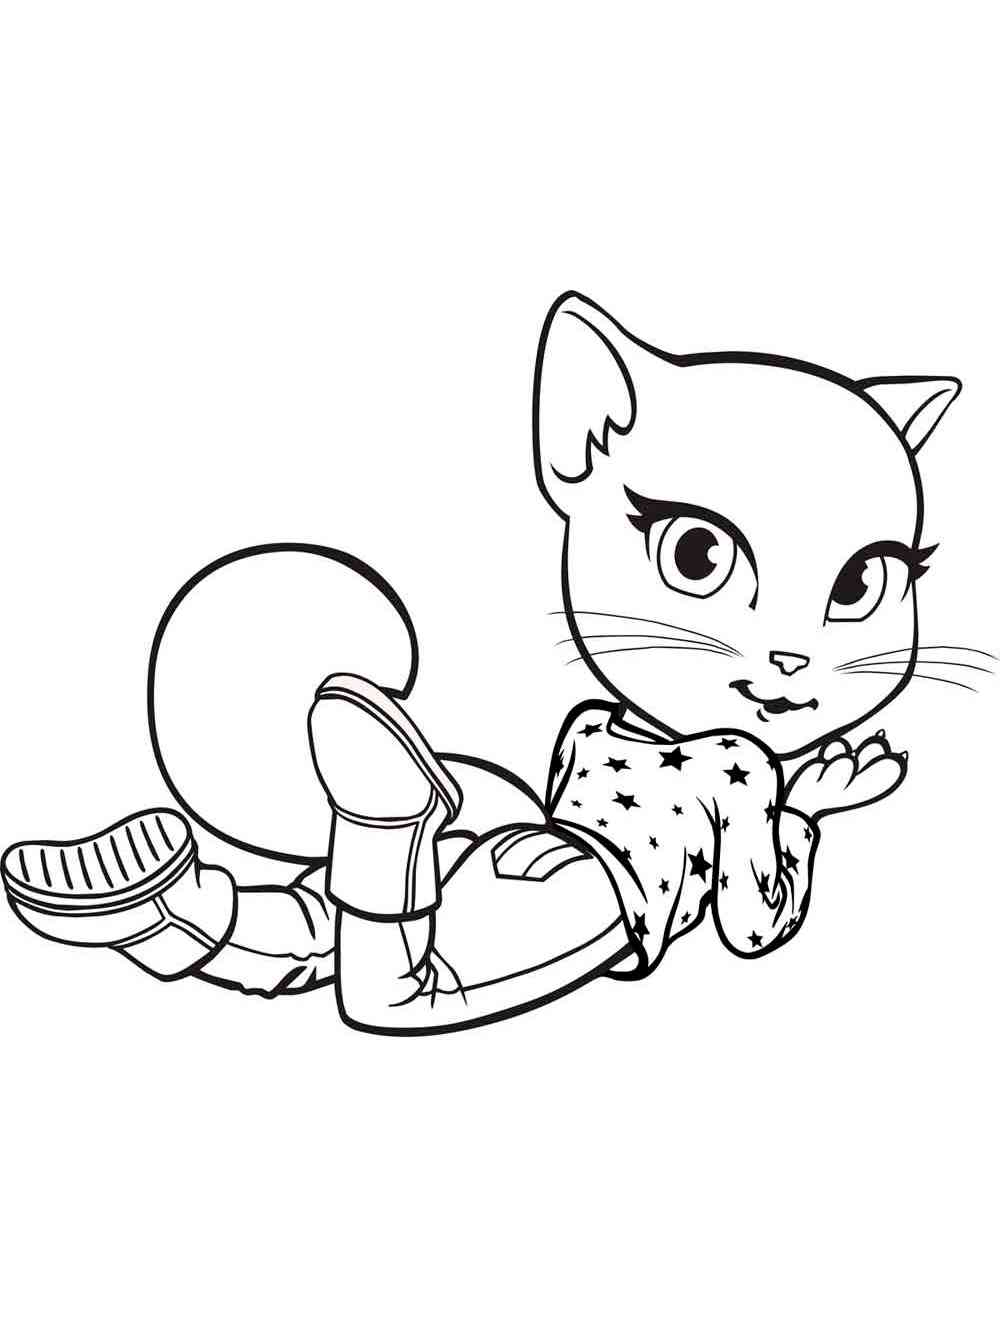 Lovely Angela coloring page